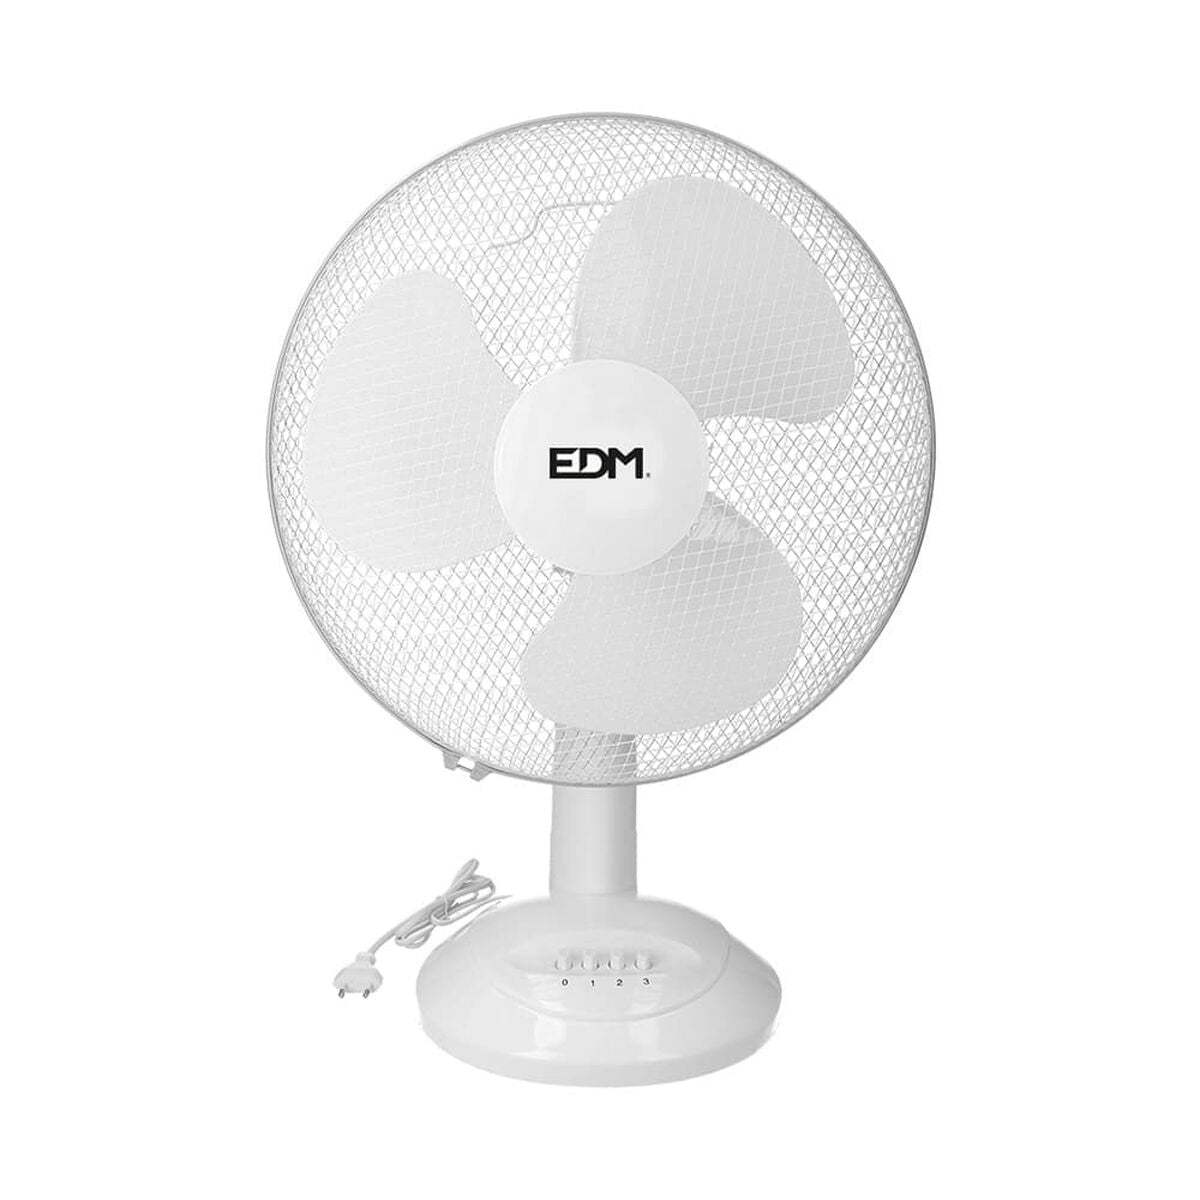 Table Fan EDM White 35 W Ø 30 x 48 cm, EDM, Home and cooking, Portable air conditioning, table-fan-edm-white-35-w-o-30-x-48-cm, Brand_EDM, category-reference-2399, category-reference-2450, category-reference-2451, category-reference-t-19656, category-reference-t-21087, category-reference-t-25217, Condition_NEW, ferretería, Price_20 - 50, summer, RiotNook